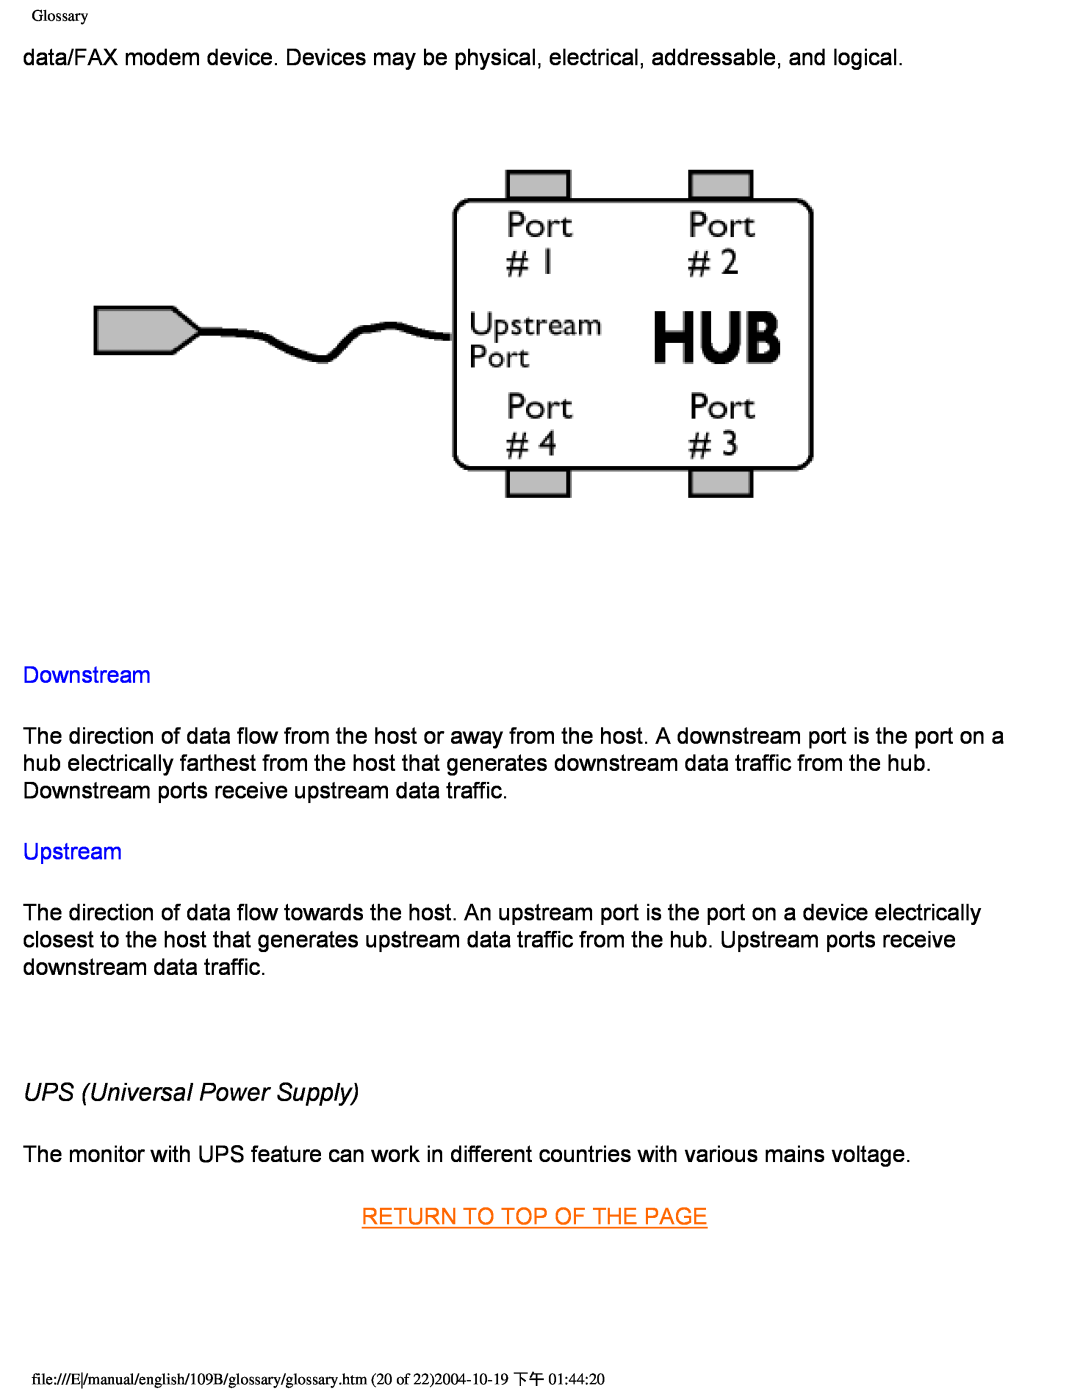 Philips 109B user manual UPS Universal Power Supply, Downstream, Upstream, Return To Top Of The Page 